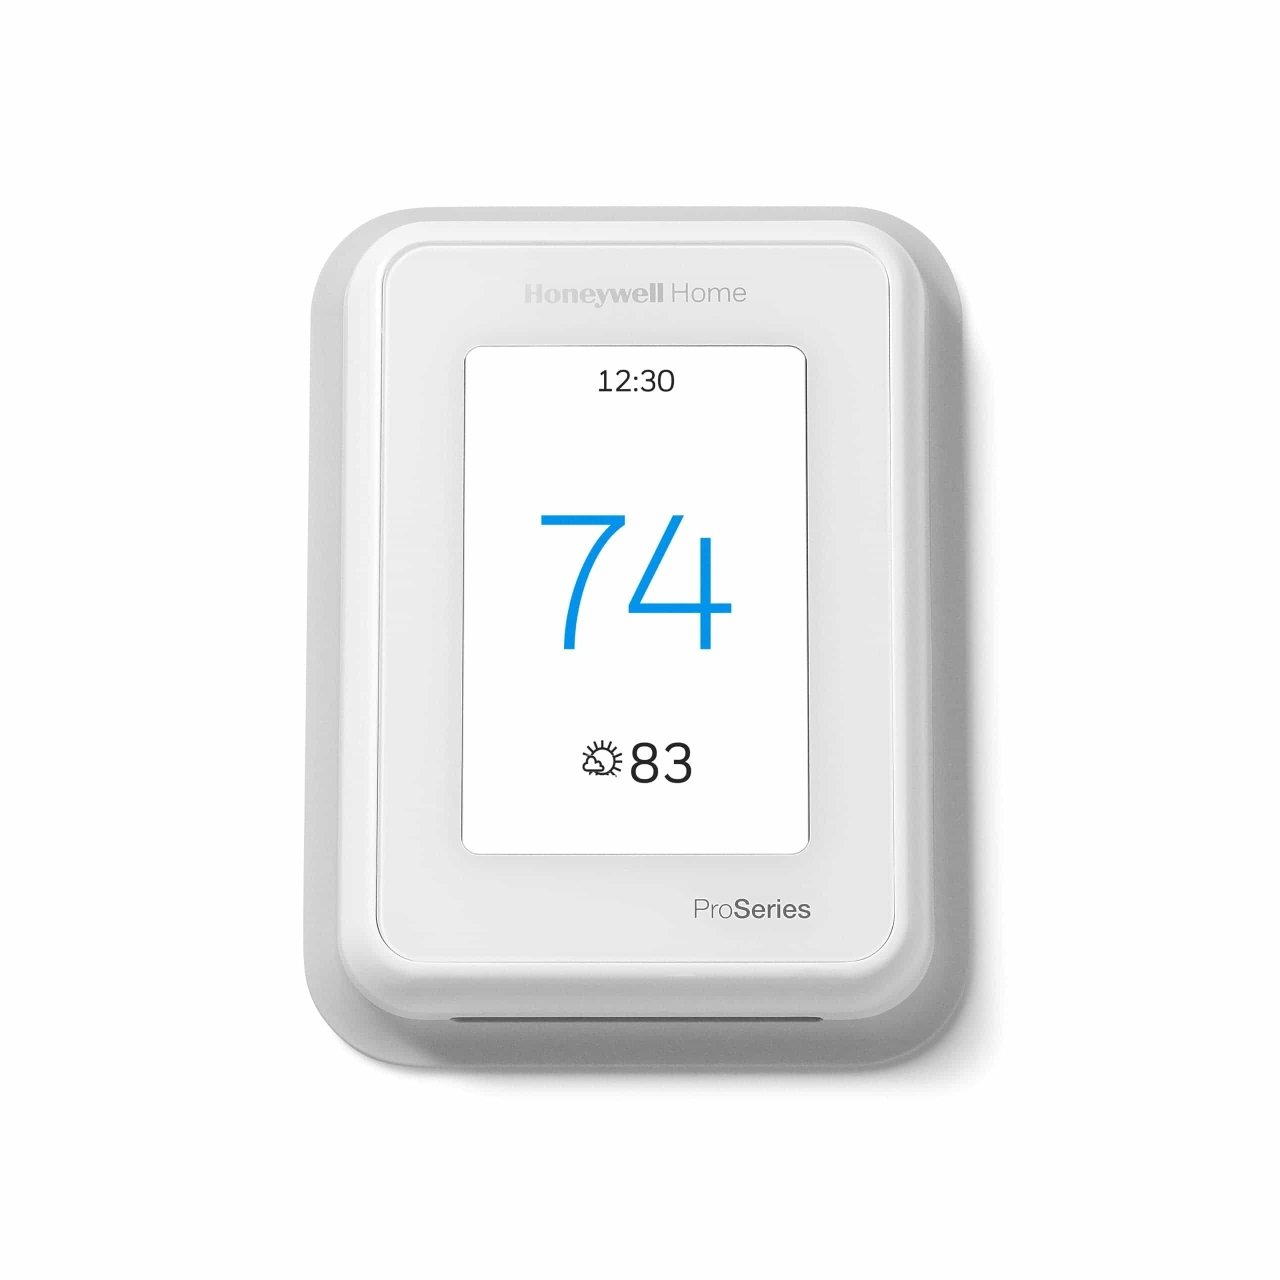 A wifi thermostat